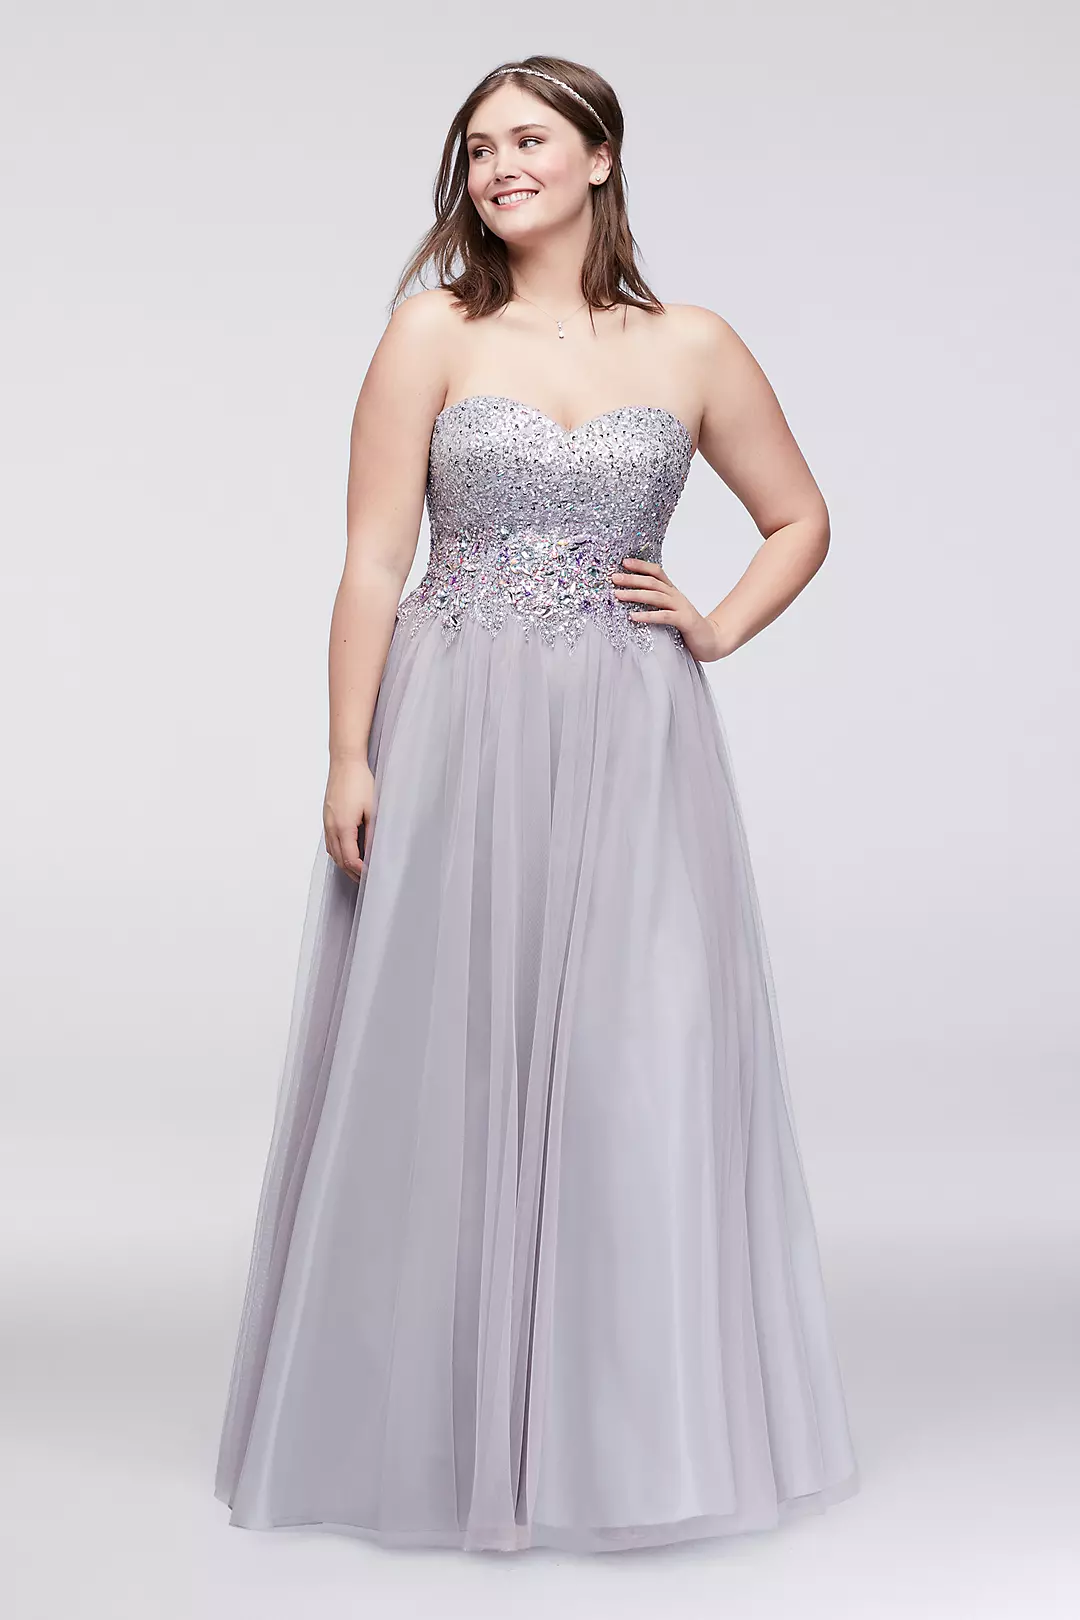 Crystal Beaded Strapless Ball Gown Image